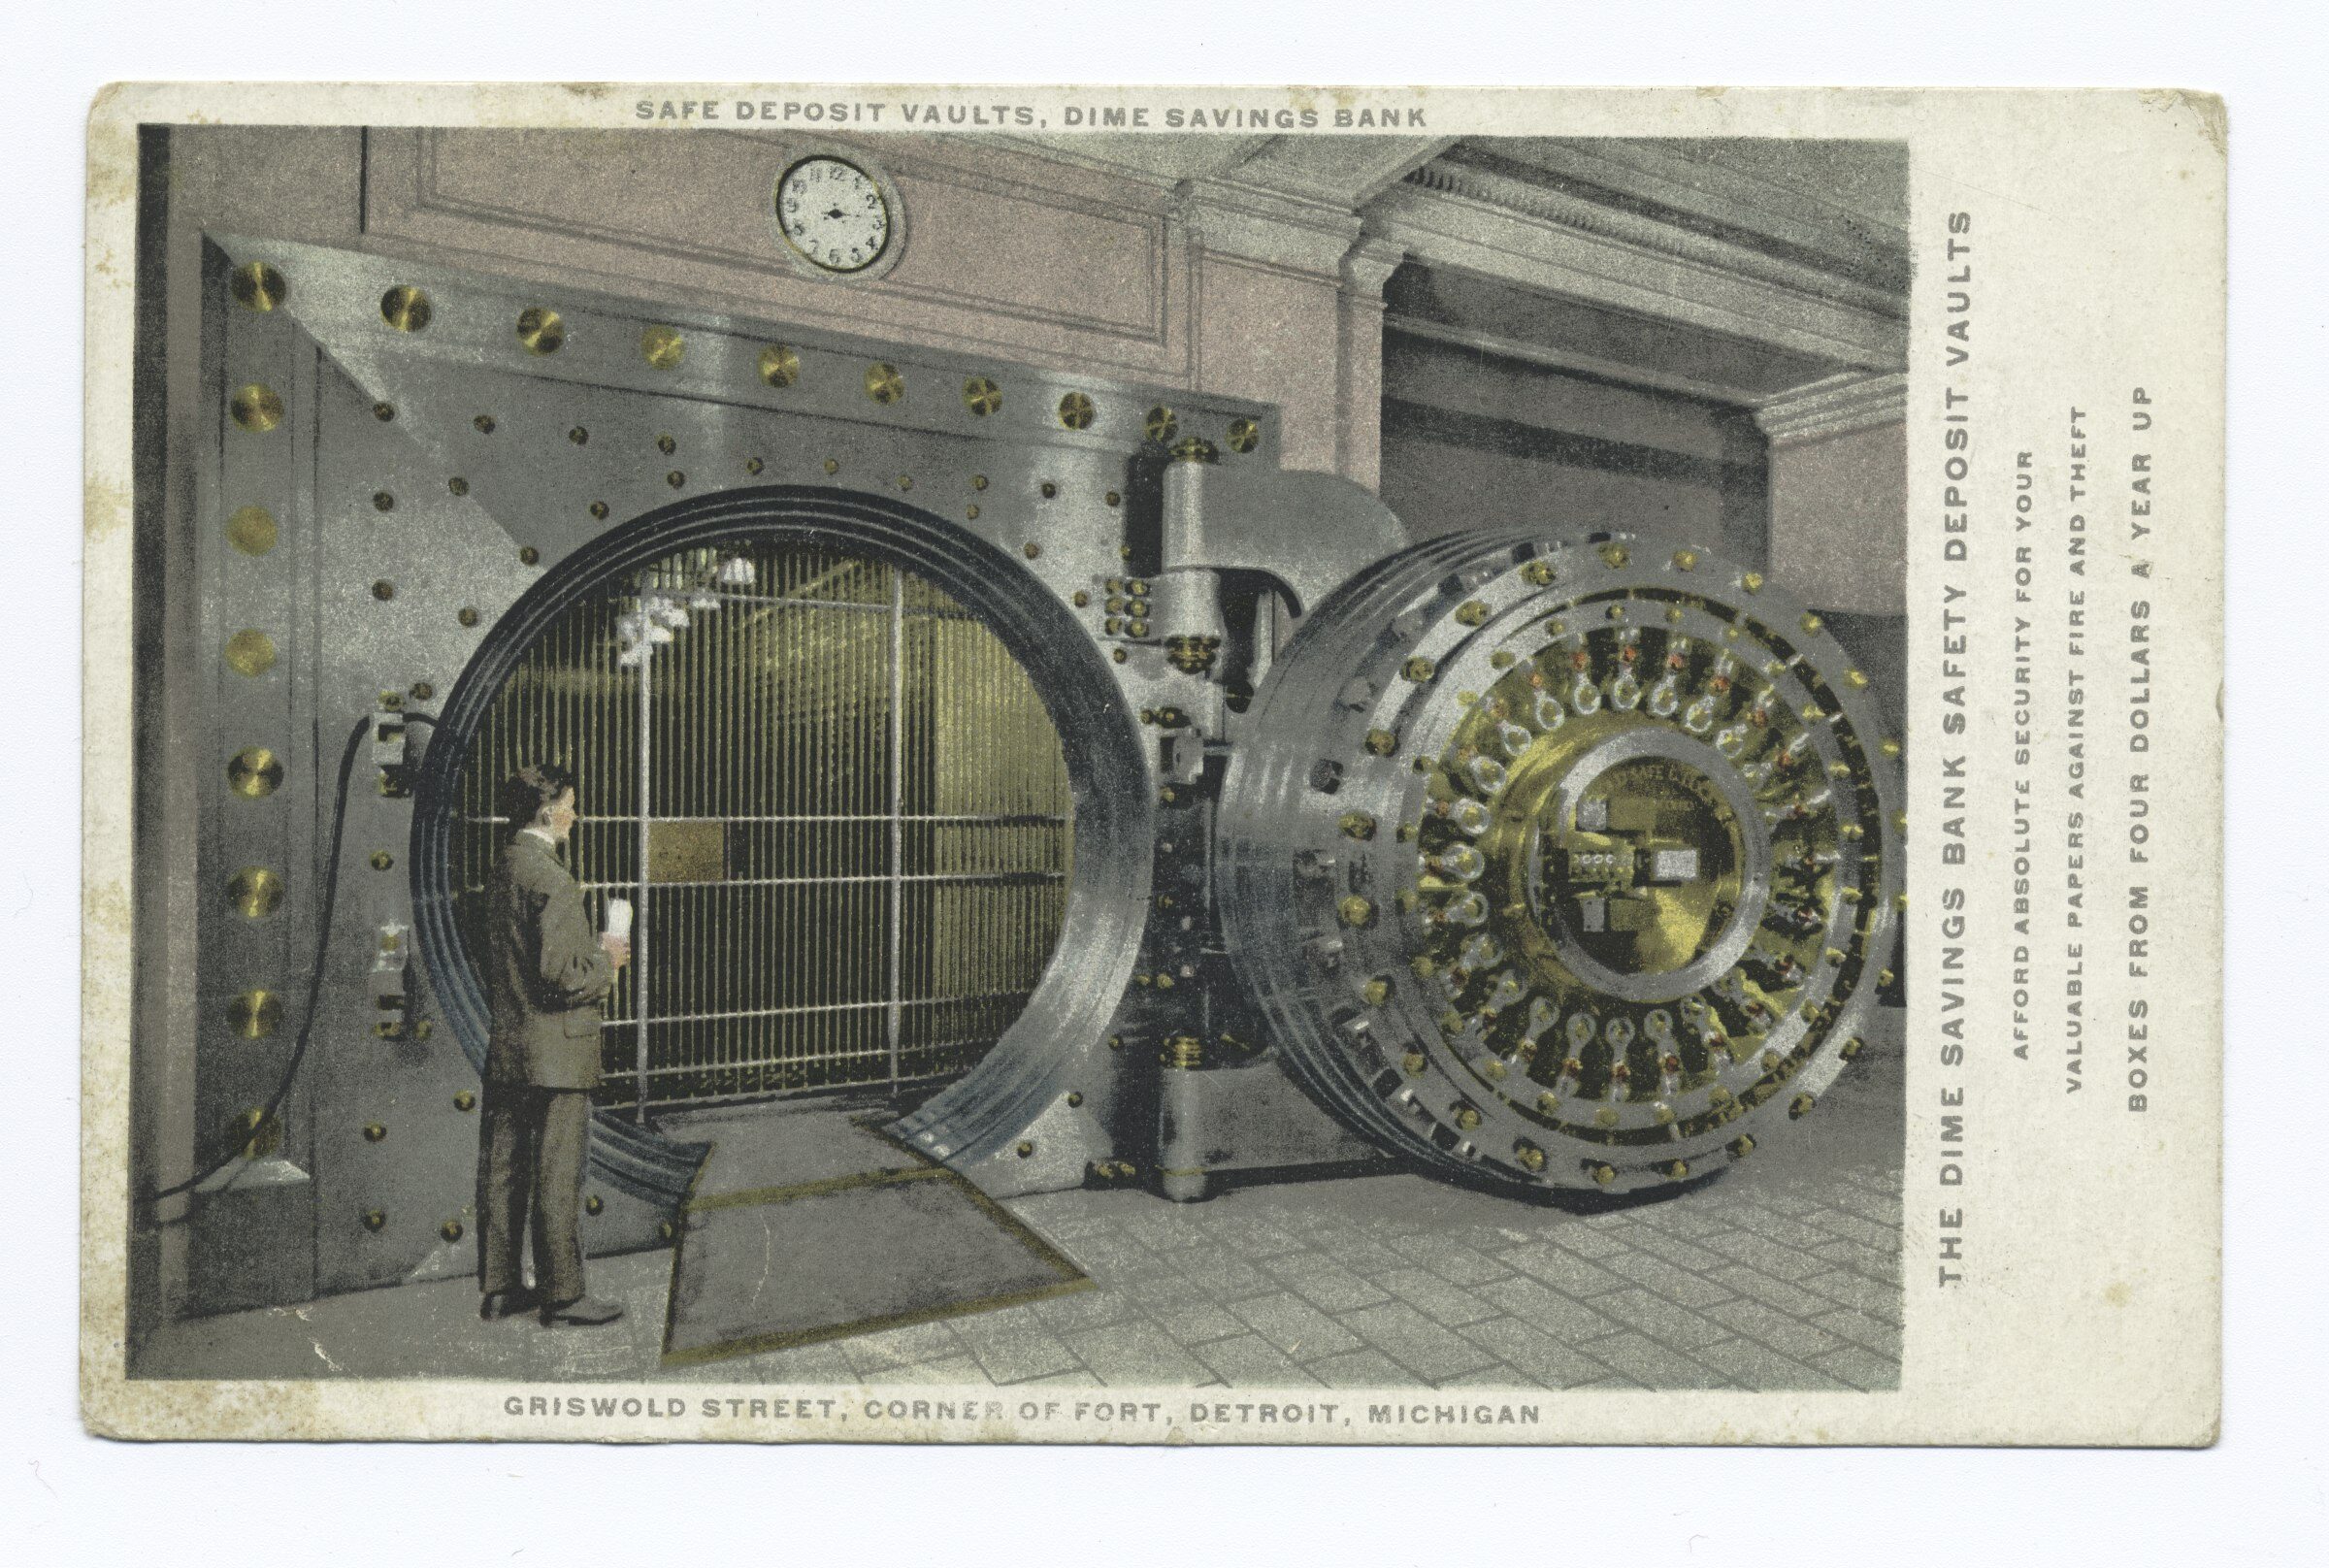 Bank vault with safety deposit boxes.